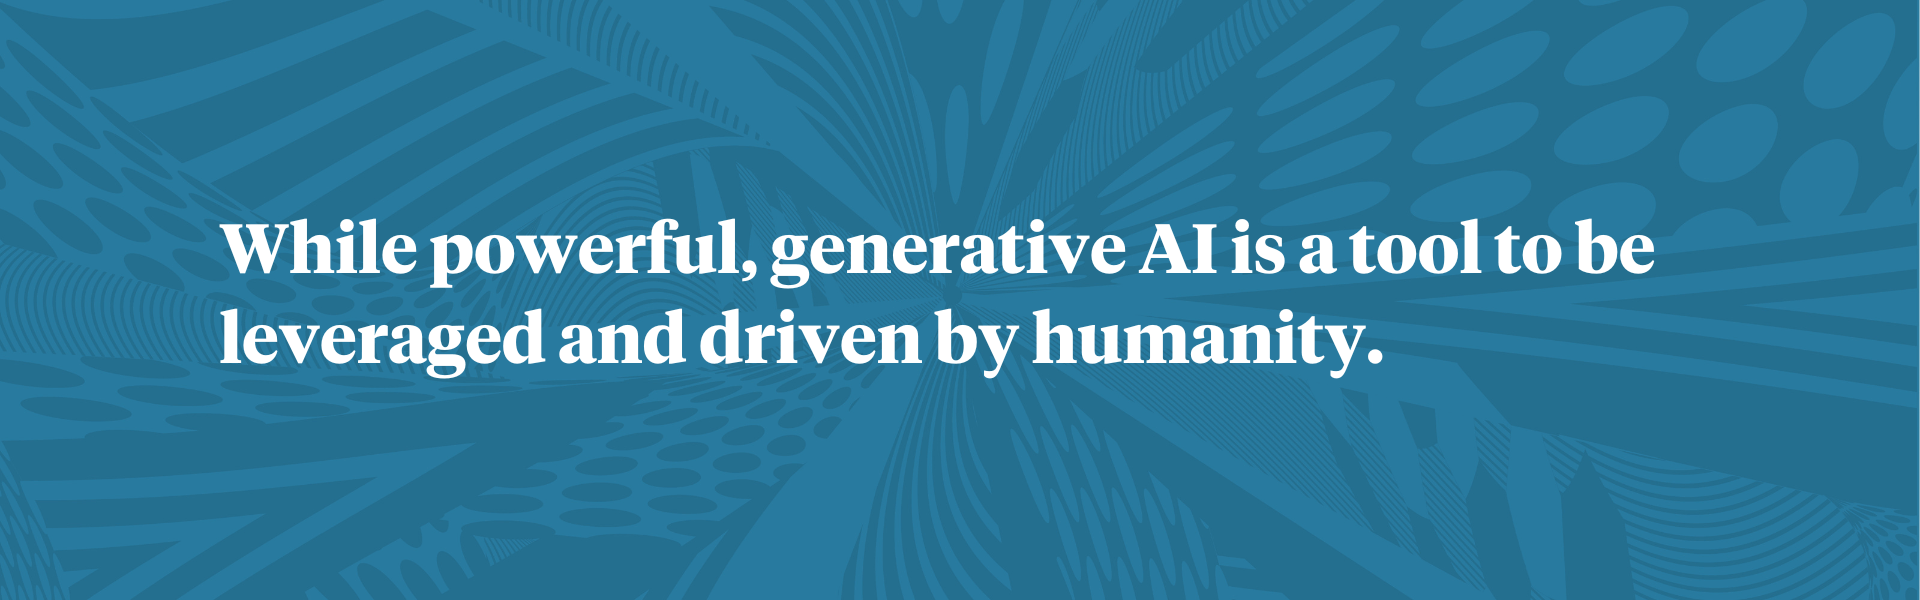 While powerful, generative AI is a tool to be leveraged and driven by humanity. 